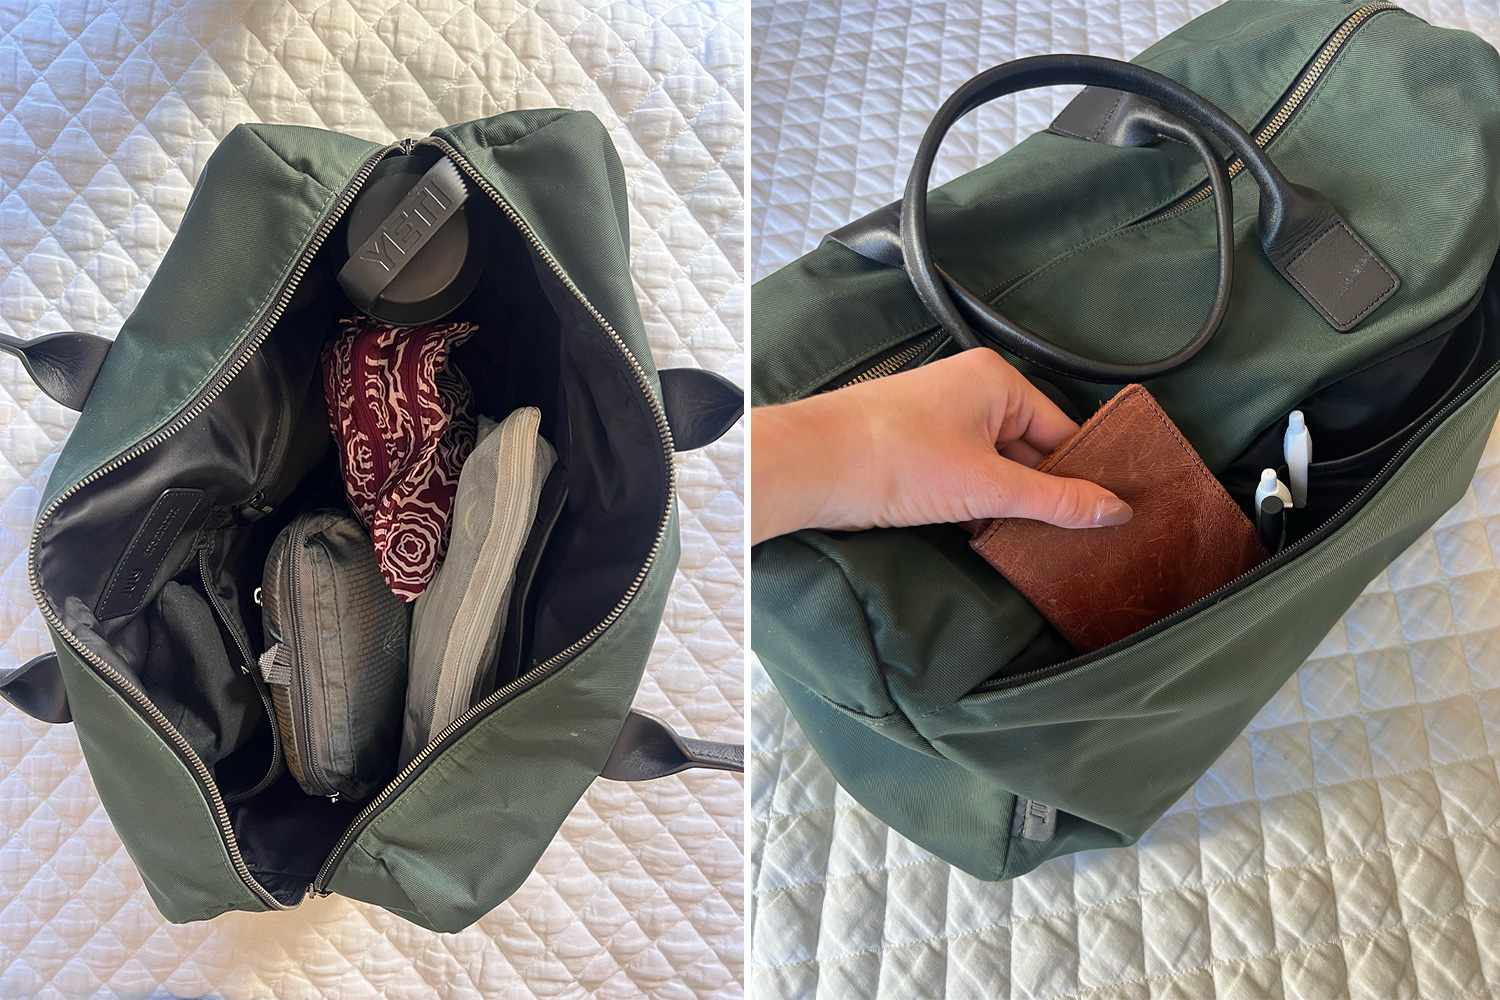 Split of two images of the July Carry All Weekender